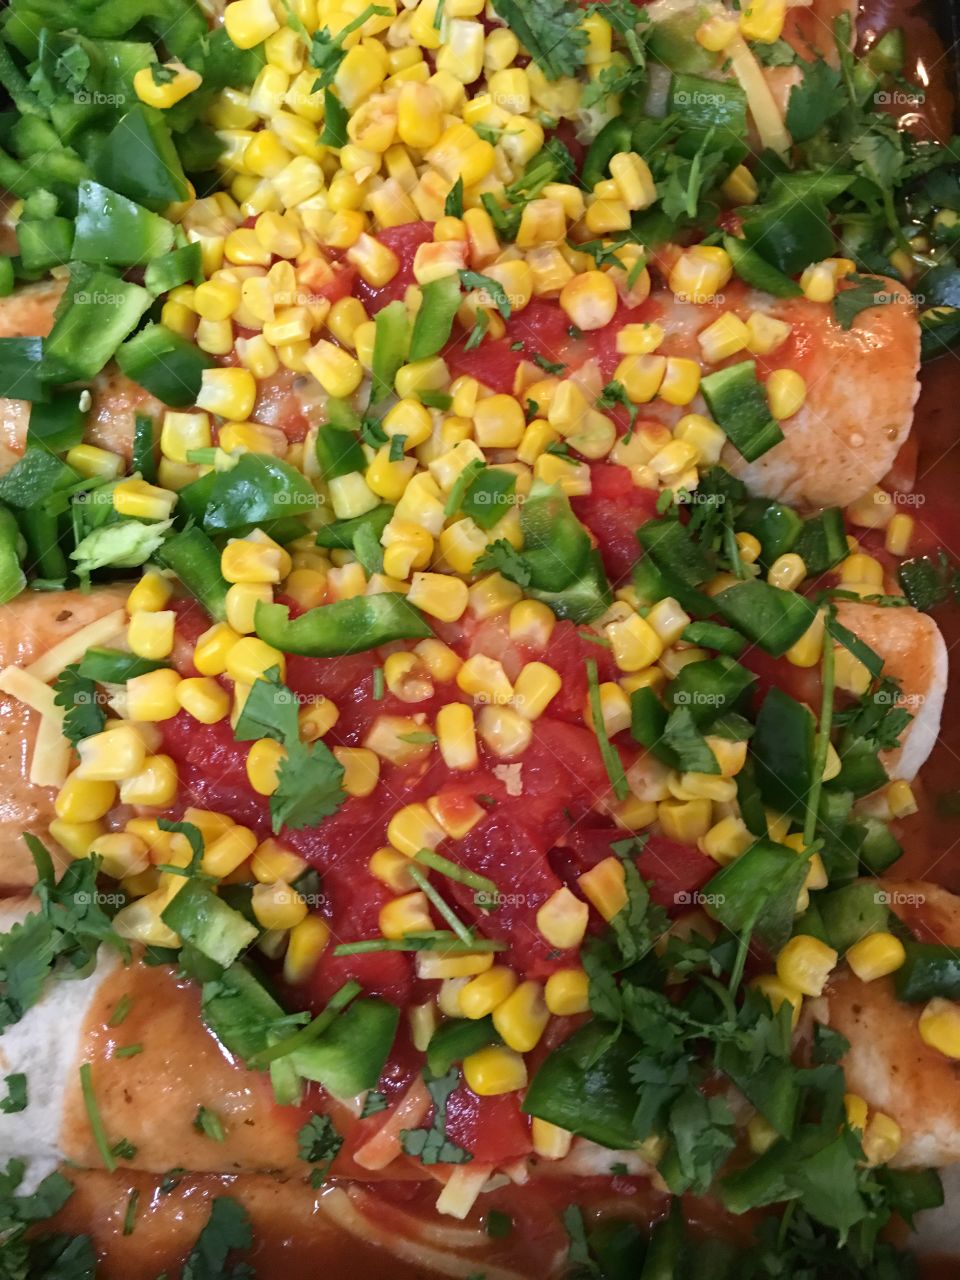 Beef enchiladas in baking pan topped with cilantro (coriander) sweet corn, tomatoes and enchilada sauce